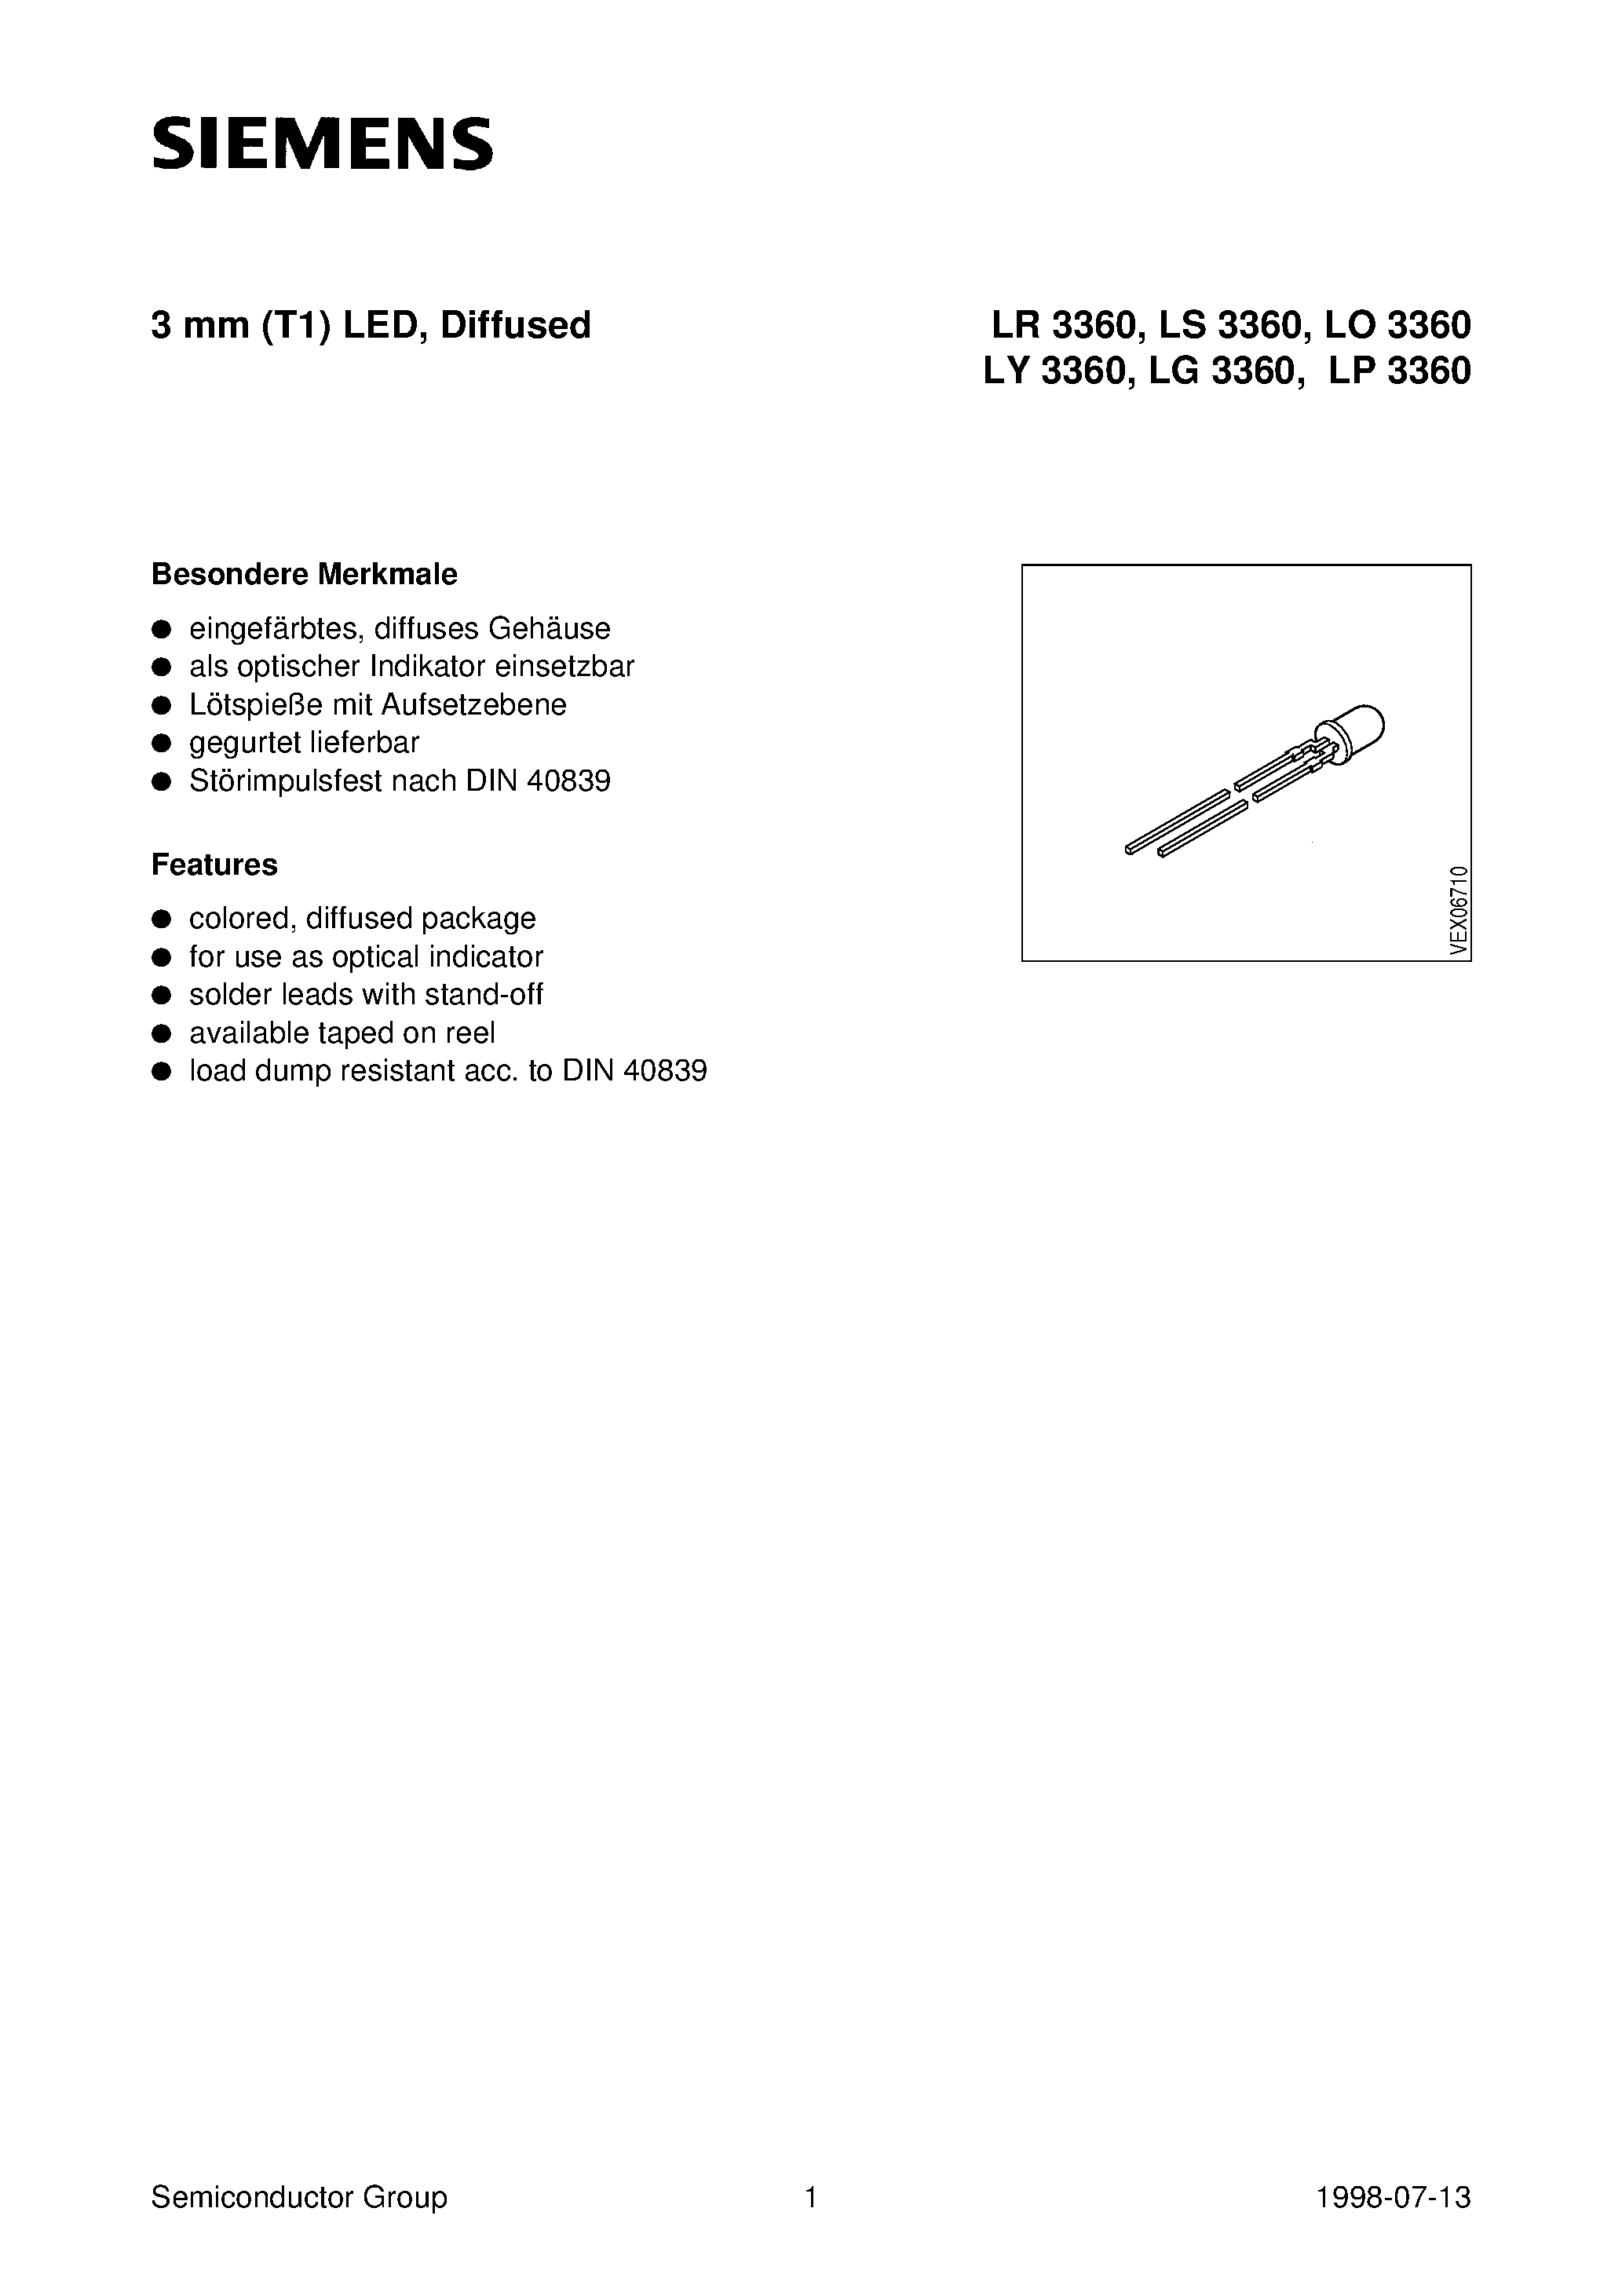 Datasheet LS3360-K - 3 mm (T1) LED / Diffused page 1